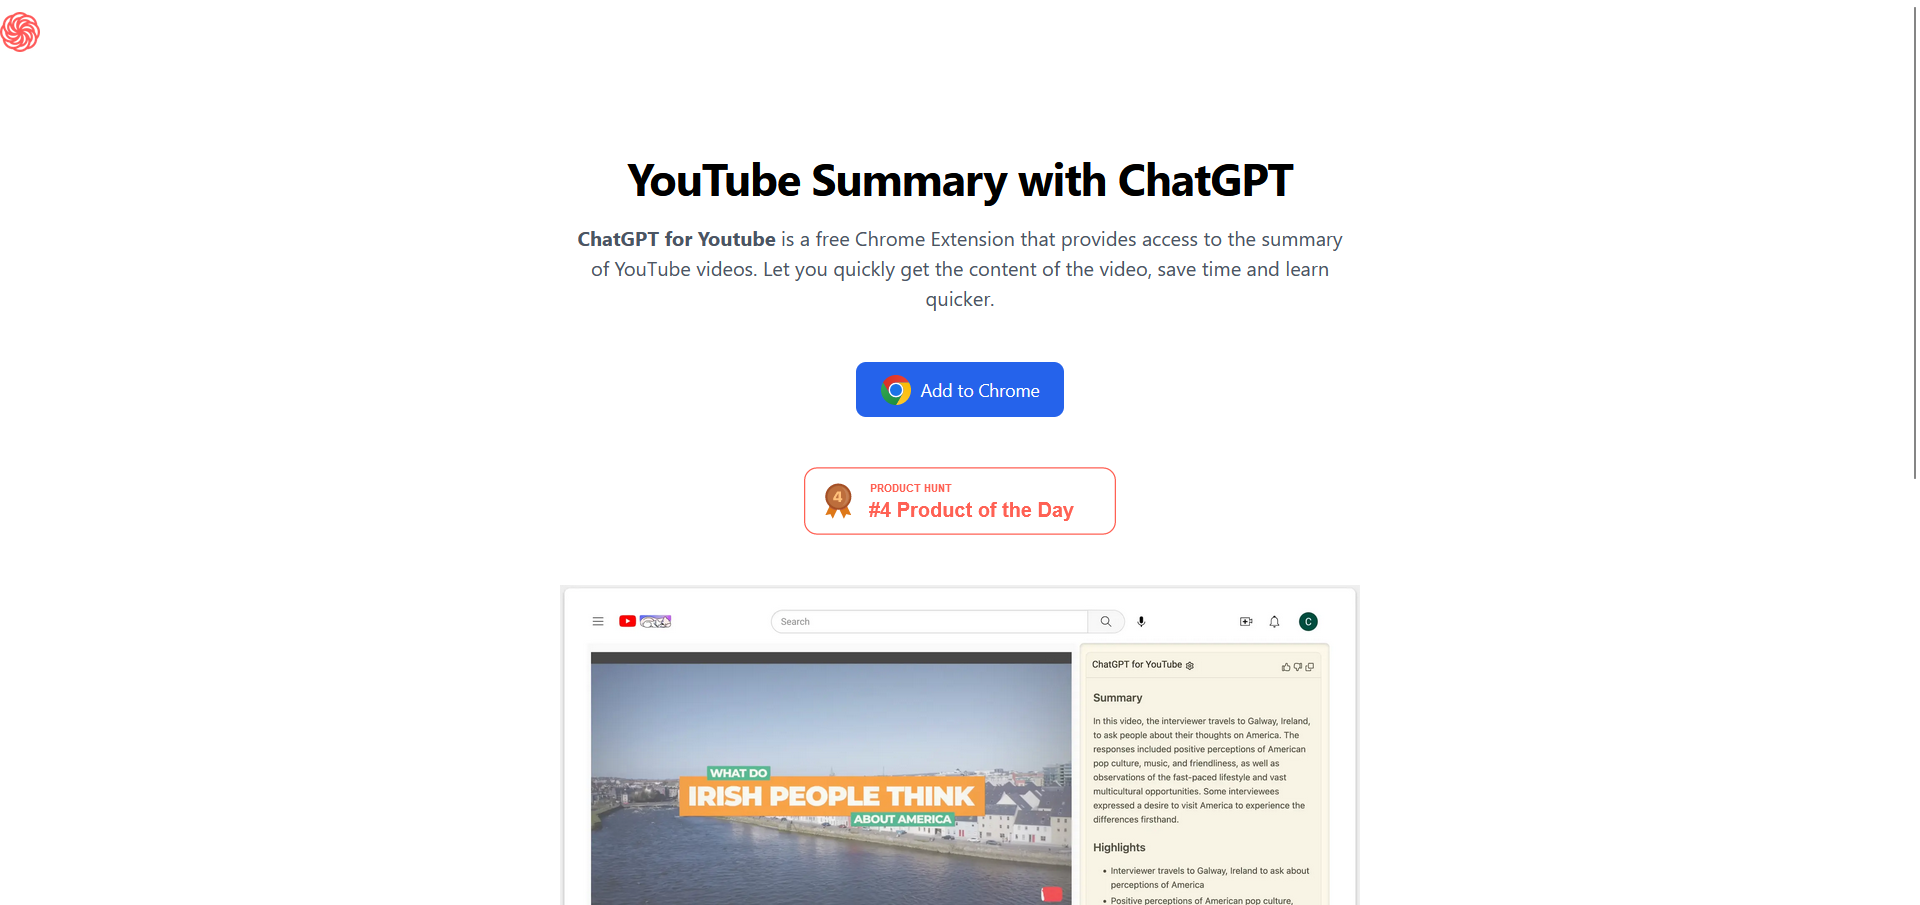 Post: ChatGPT for Youtube